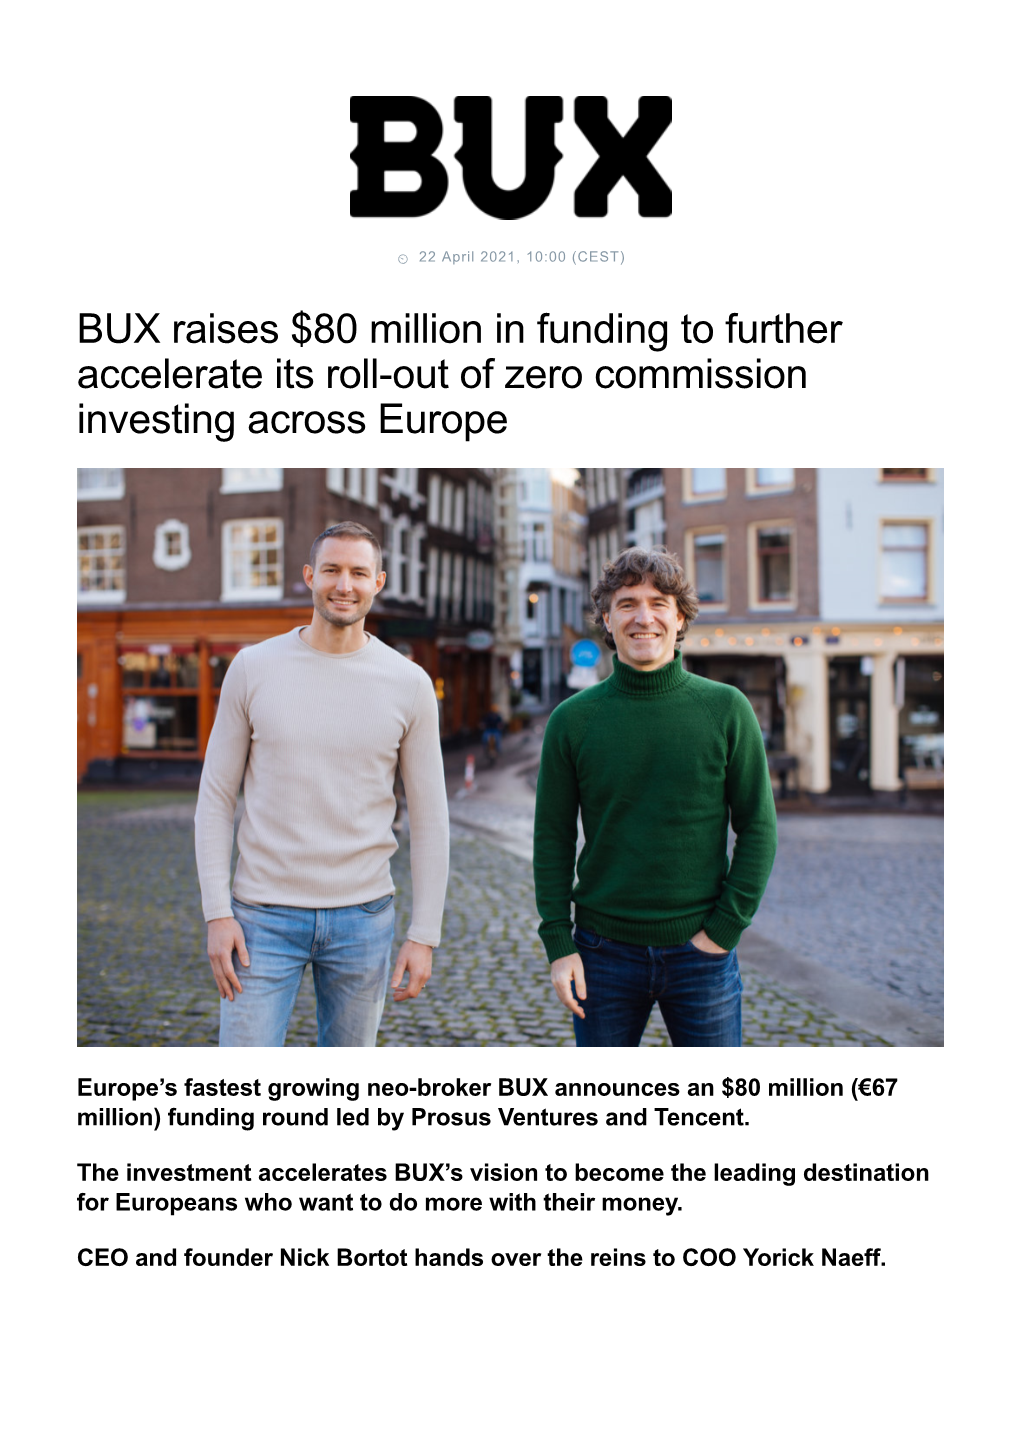 BUX Raises $80 Million in Funding to Further Accelerate Its Roll-Out of Zero Commission Investing Across Europe